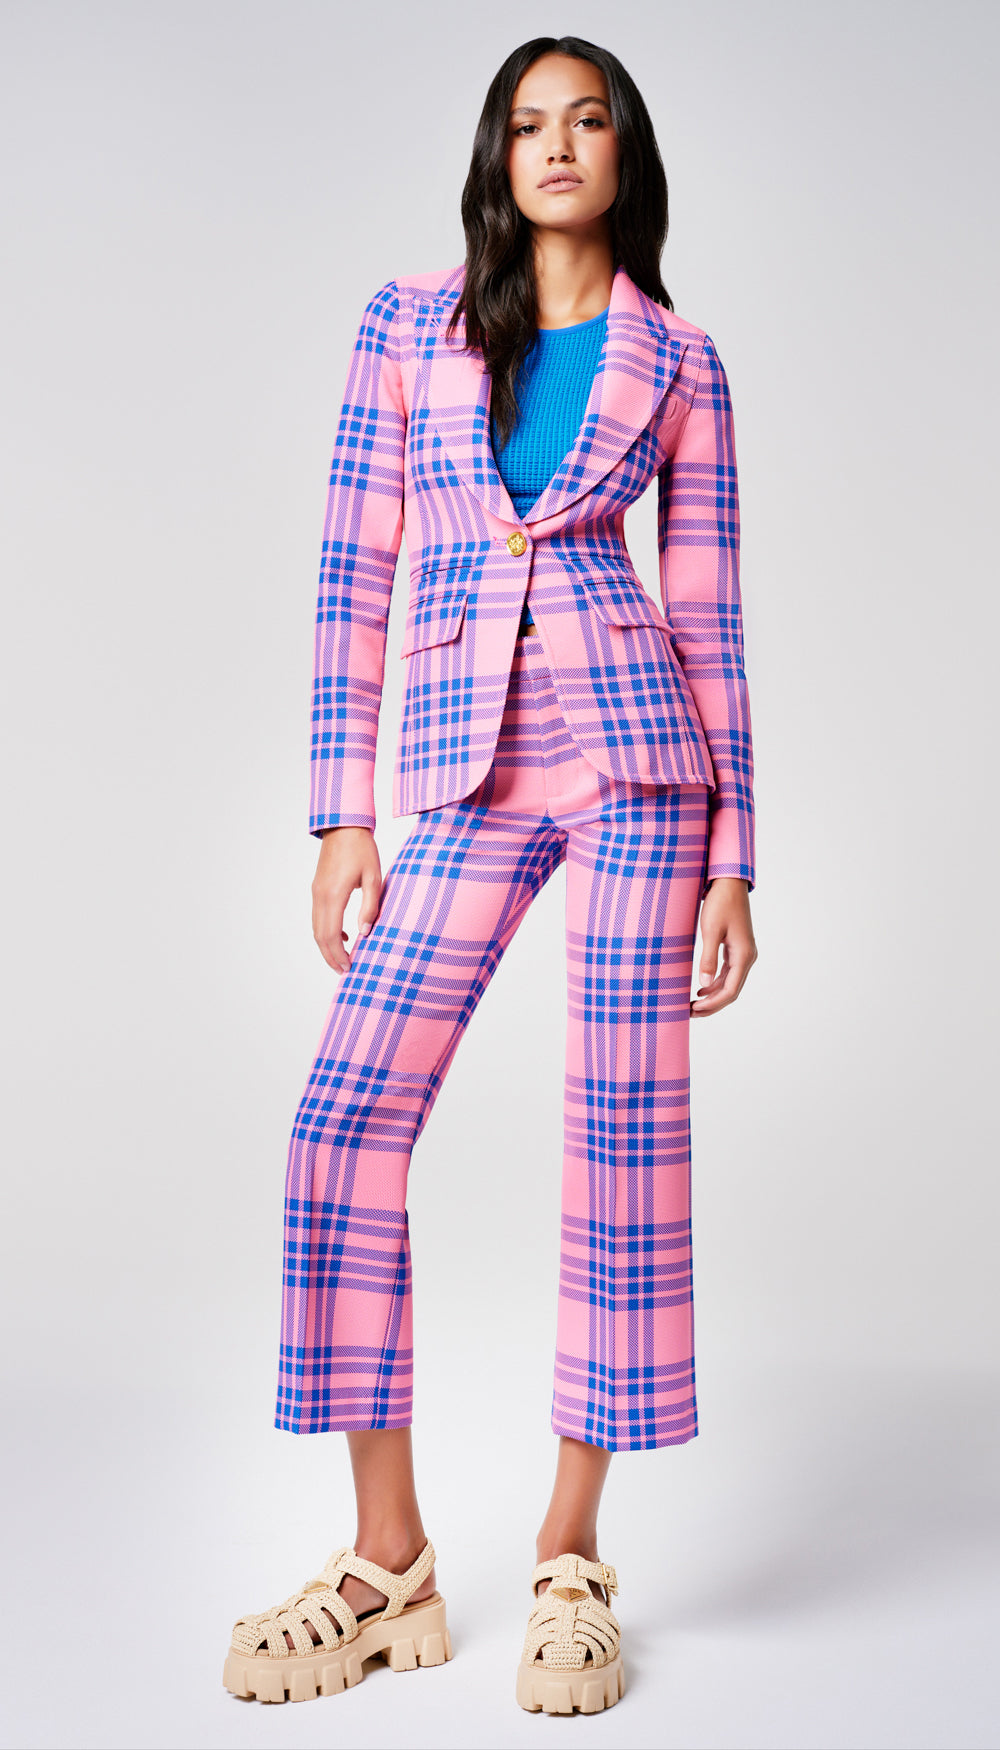 A woman in a pink and blue plaid blazer and pant.